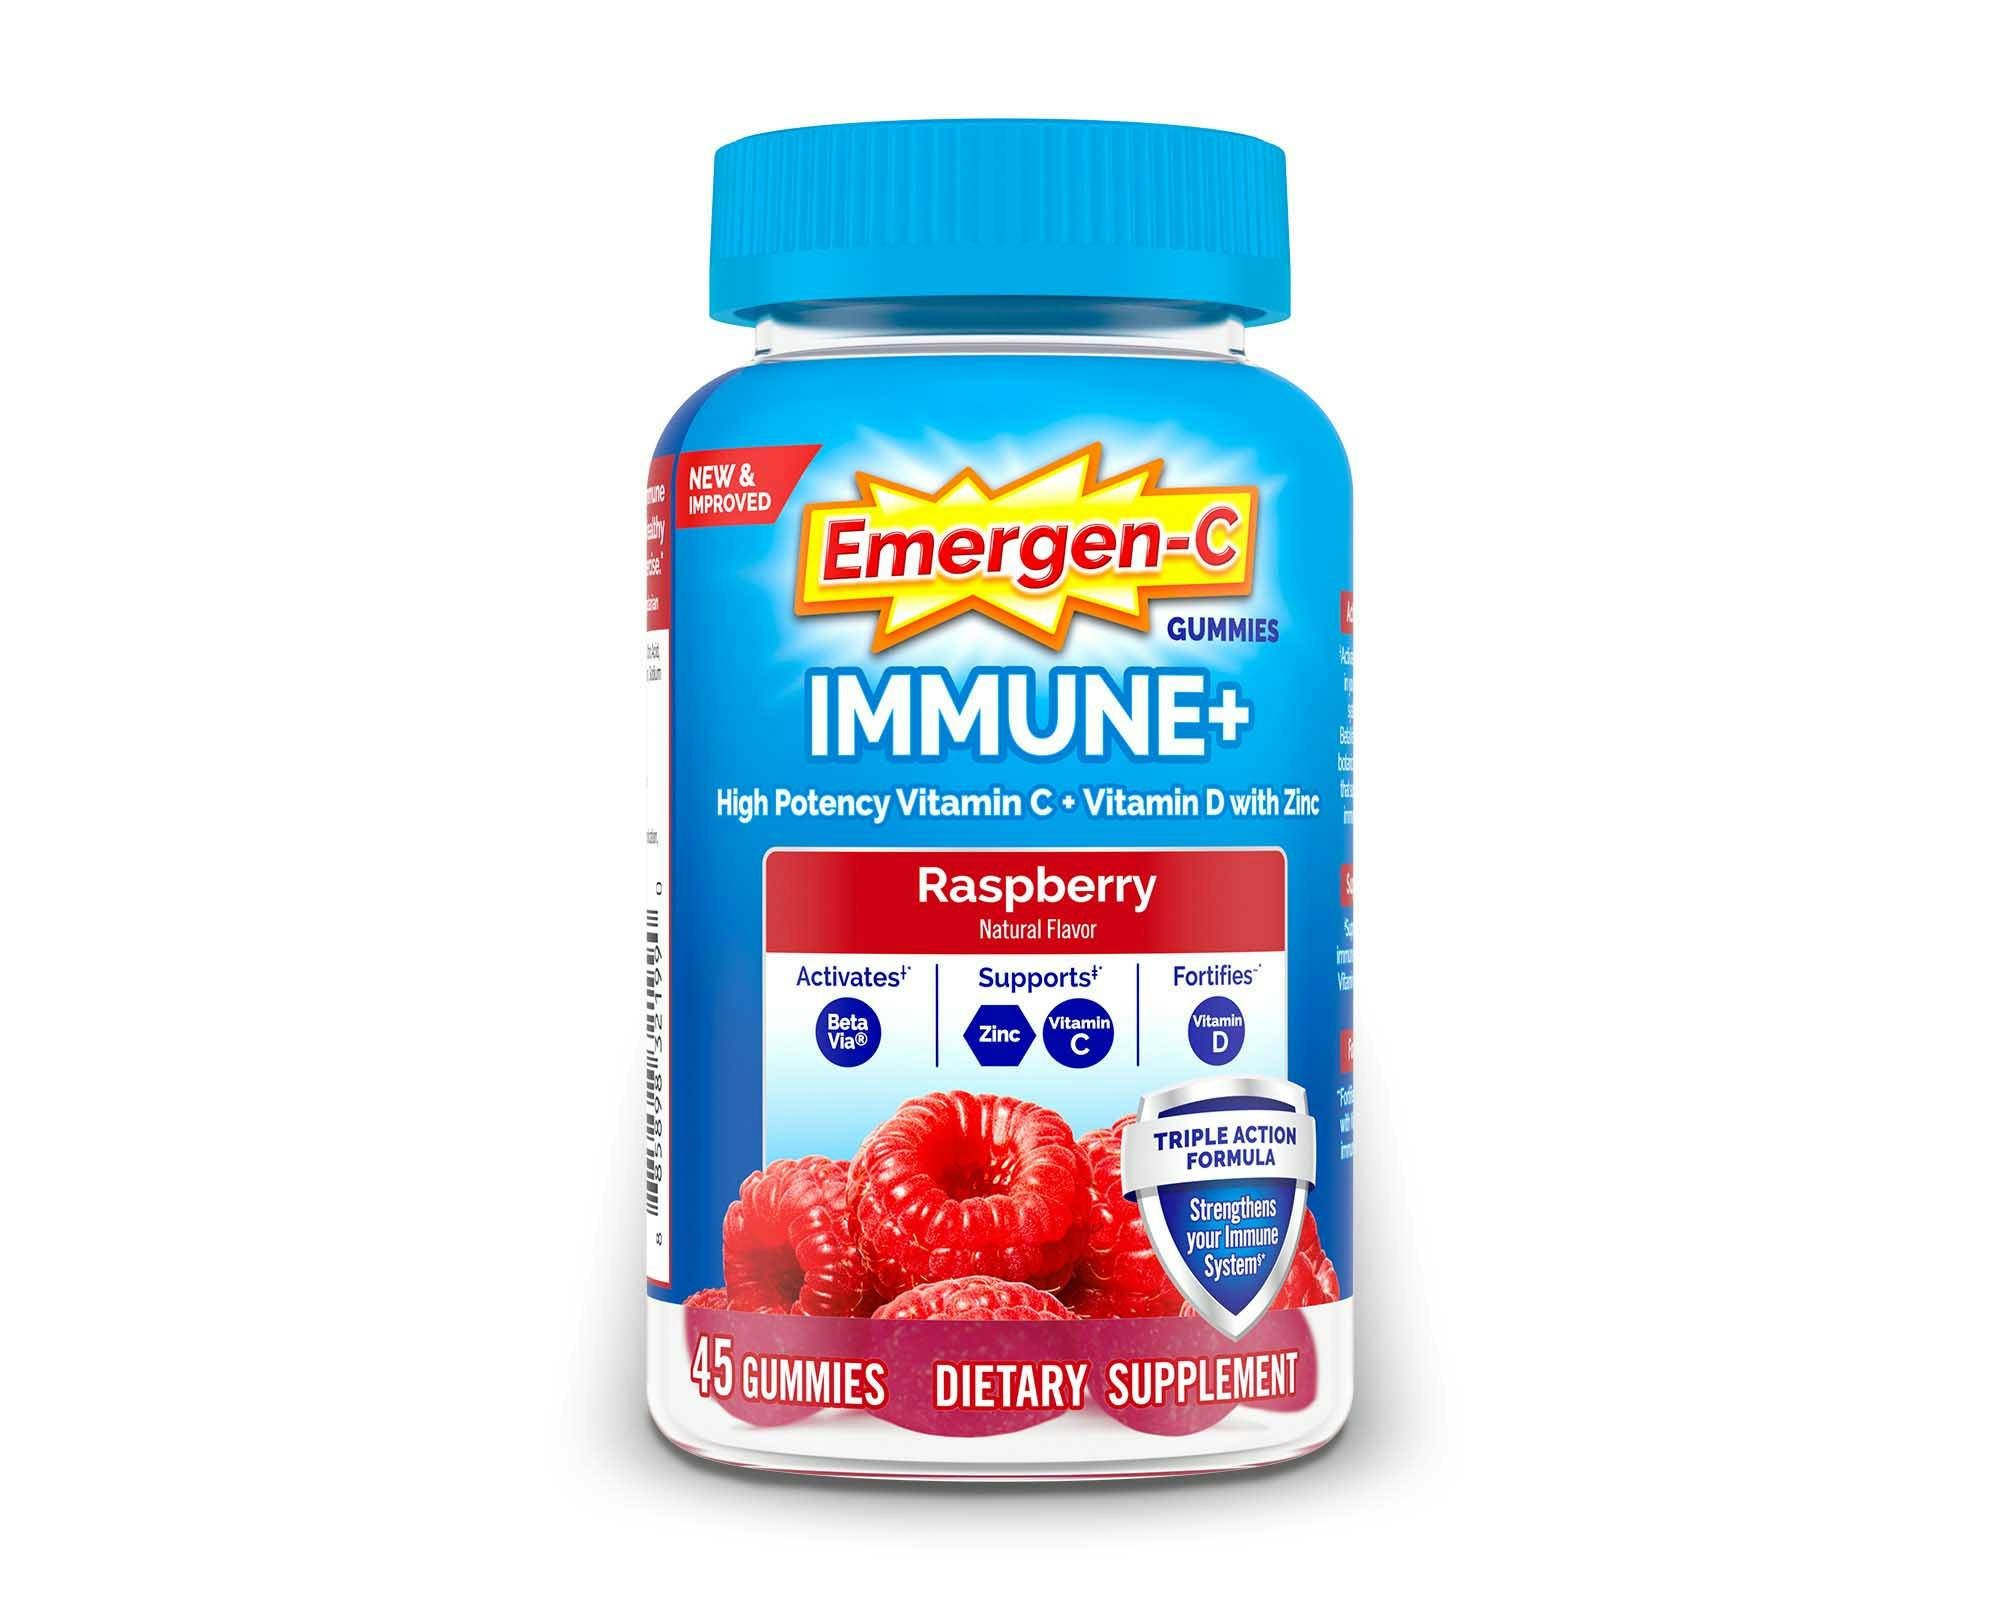 Immune+ Raspberry Gummies with Triple Action product